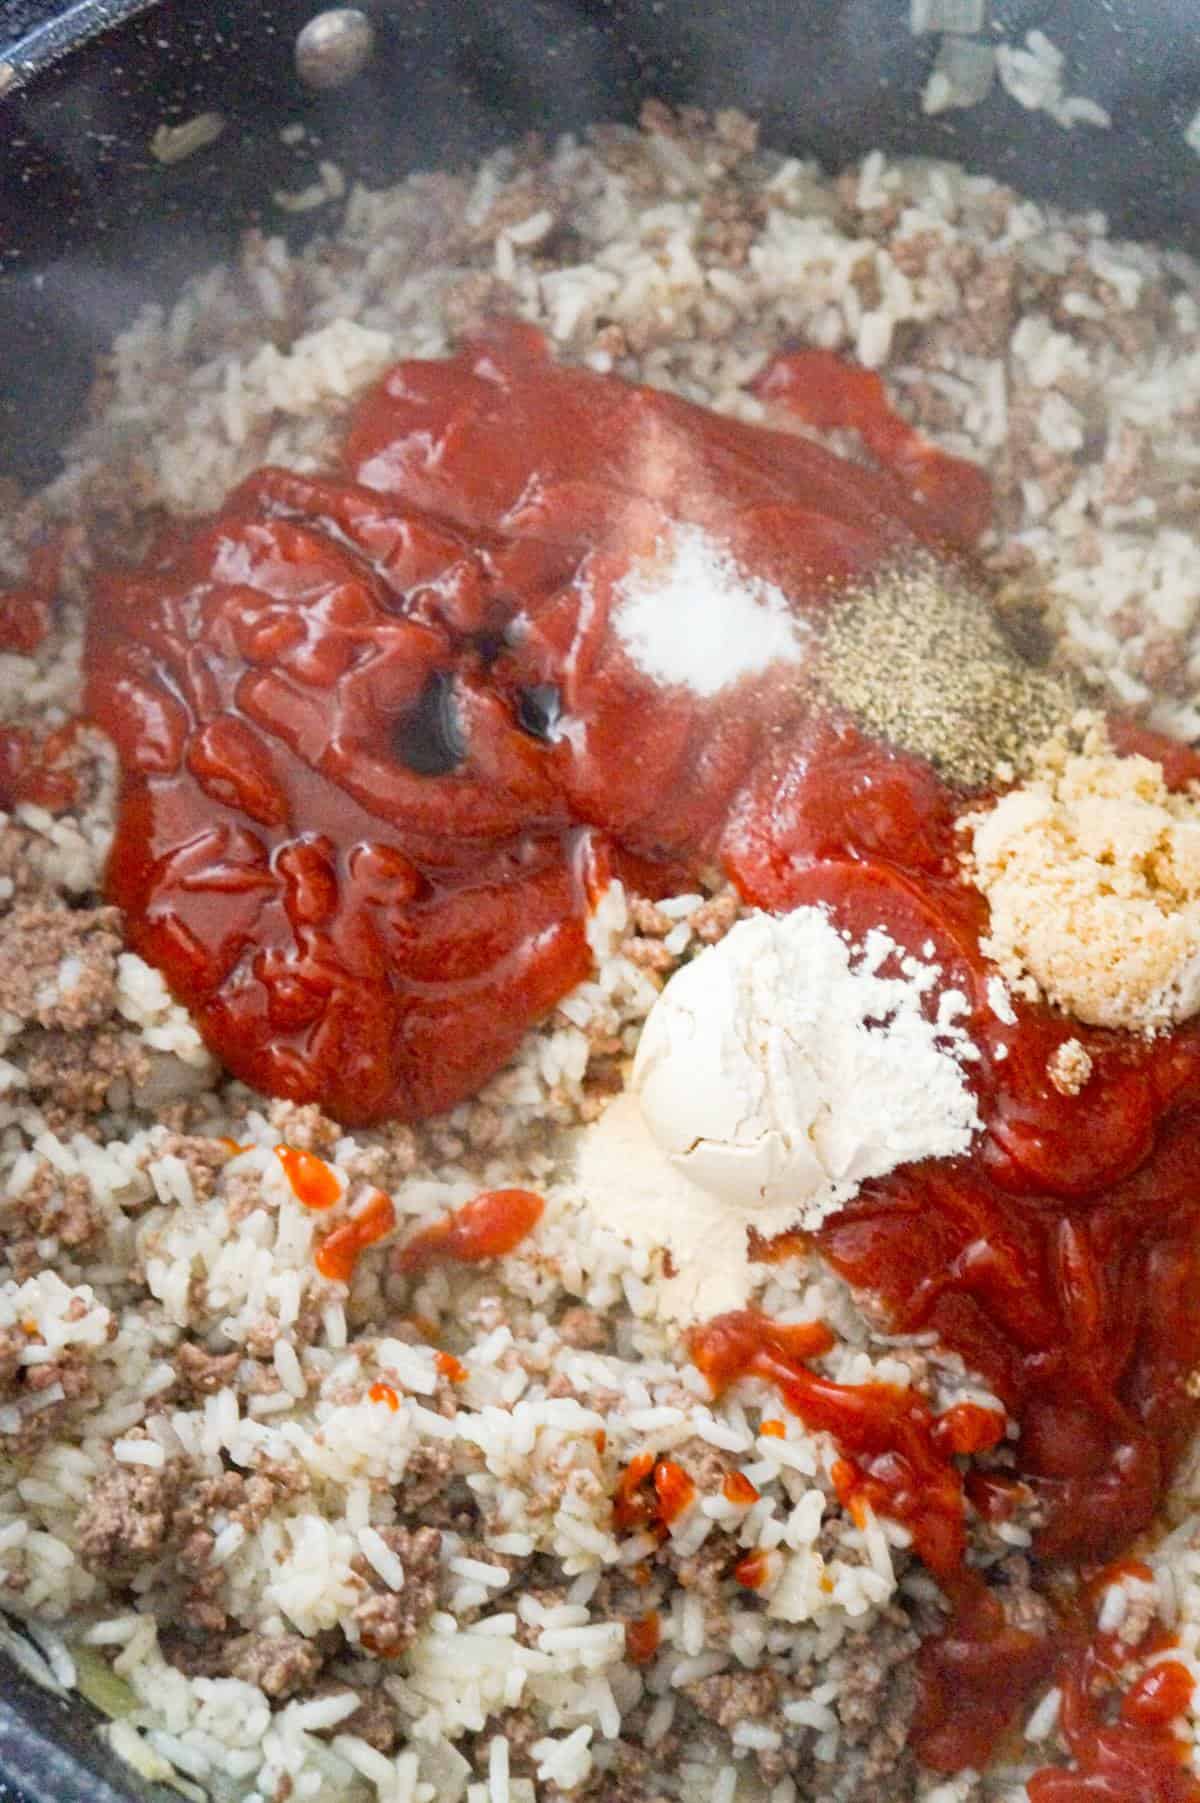 ketchup and spices on top of ground beef and rice in a saute pan